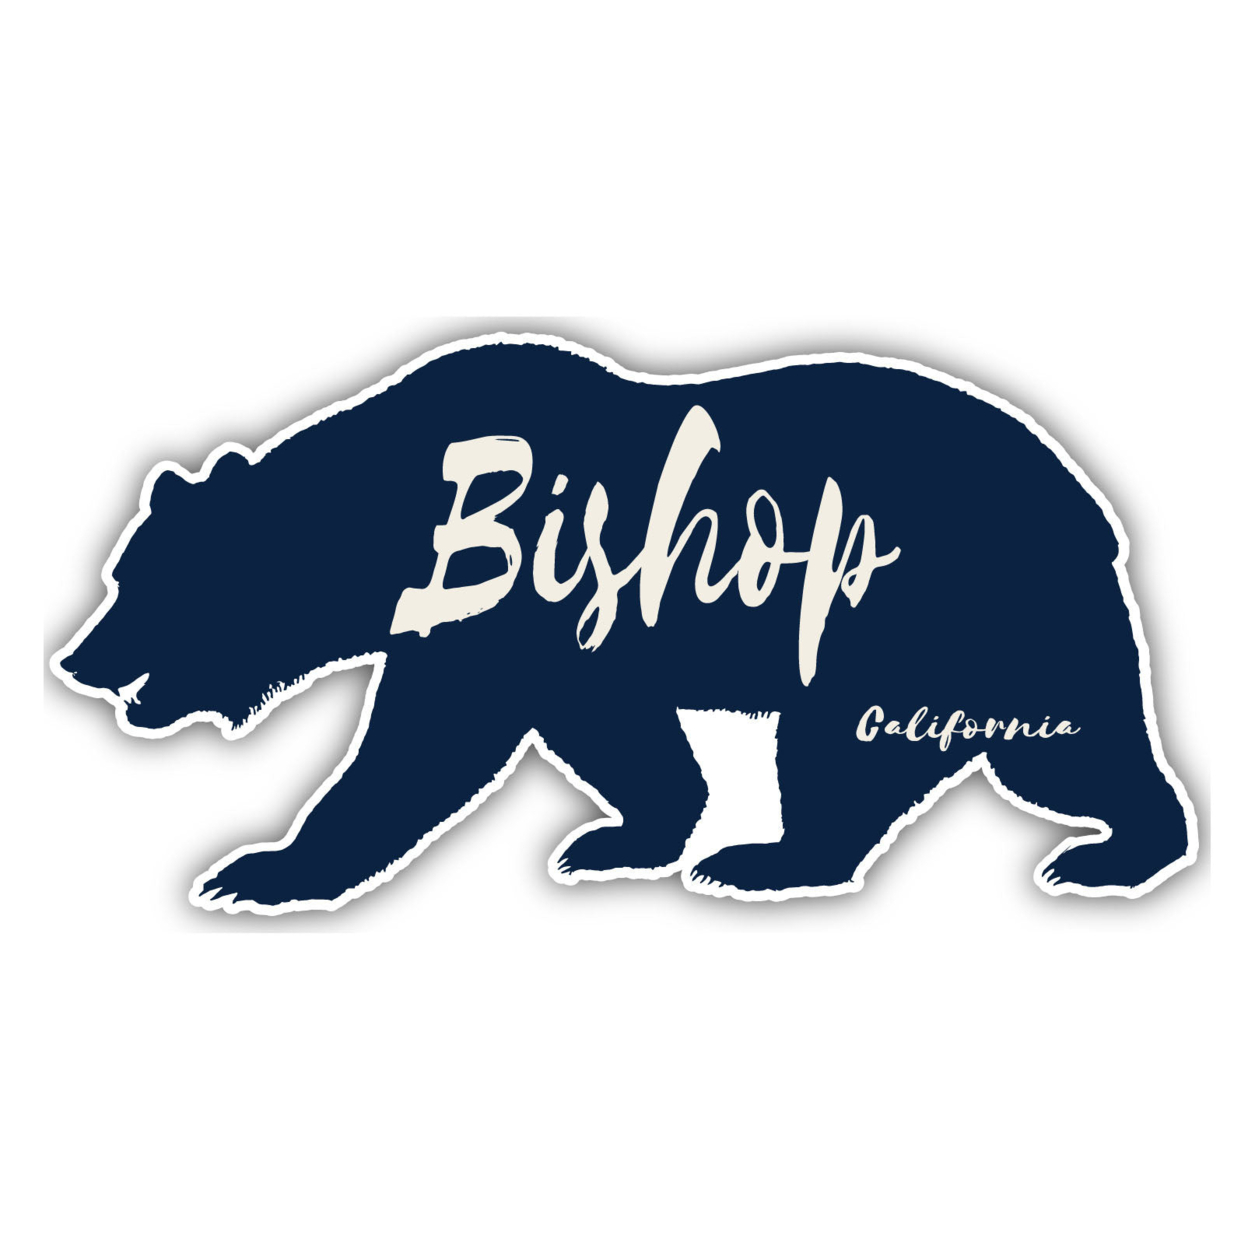 Bishop California Souvenir Decorative Stickers (Choose Theme And Size) - 4-Pack, 6-Inch, Tent